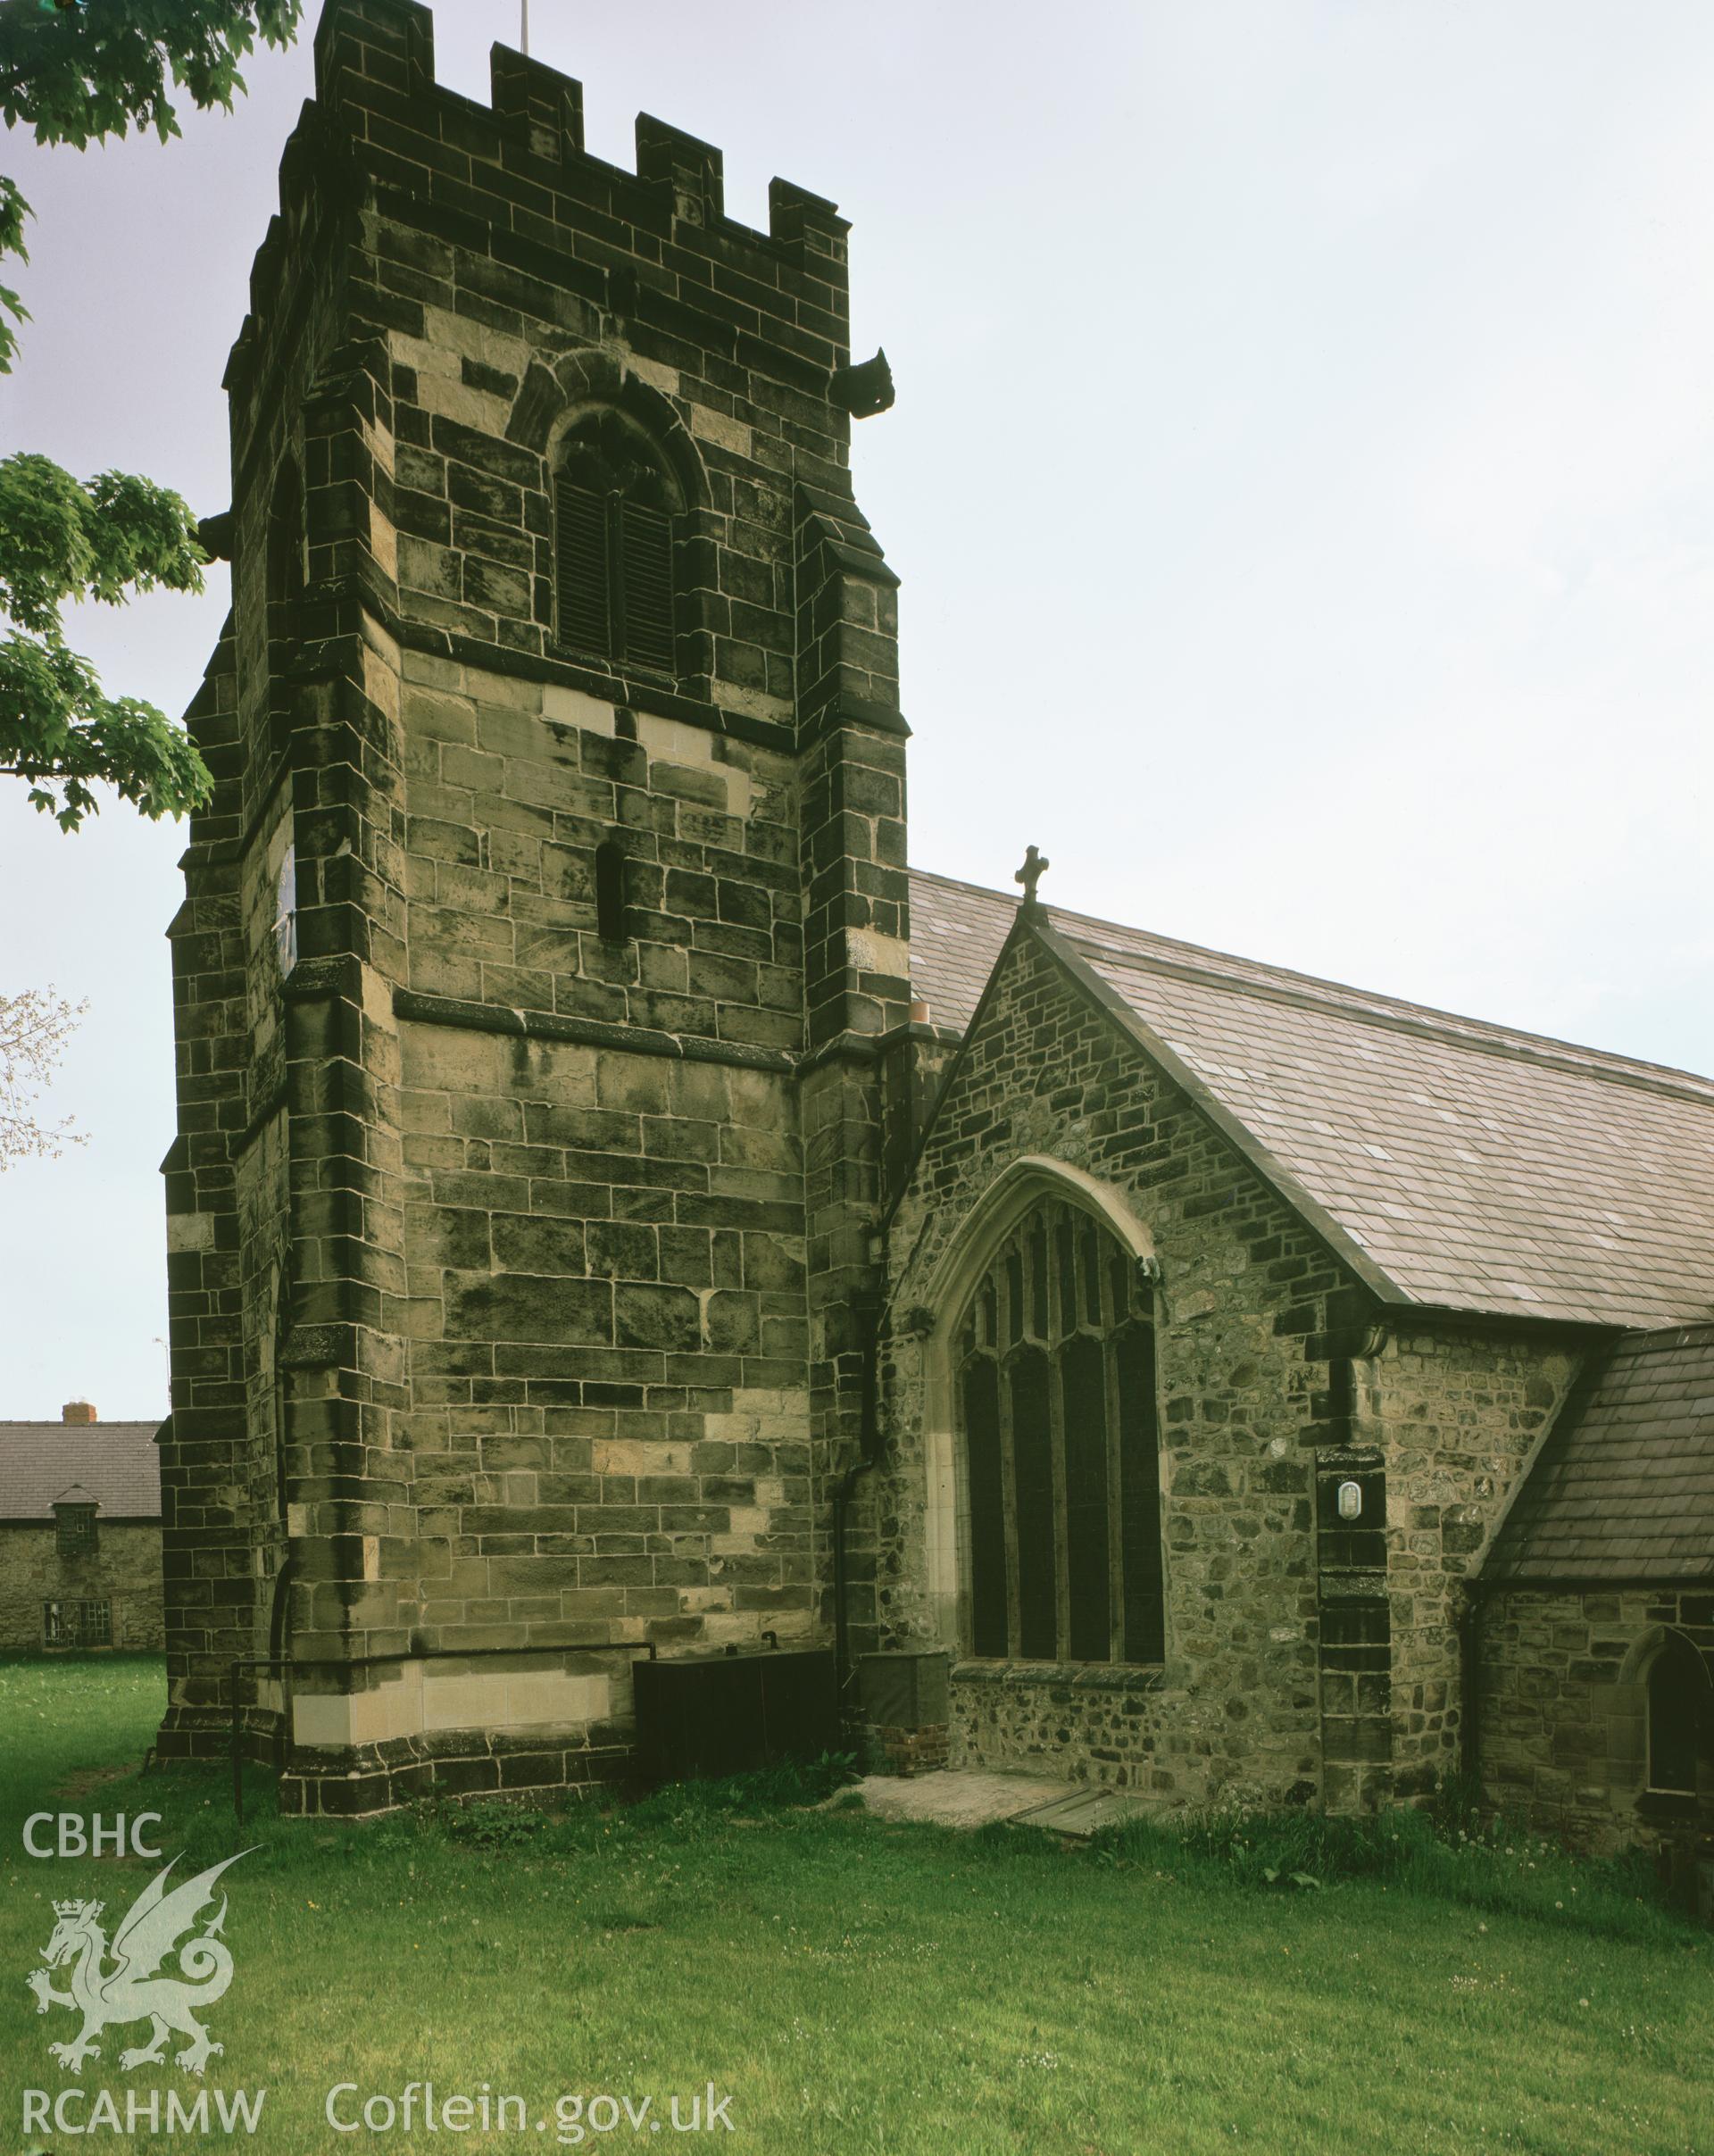 RCAHMW colour transparency showing St Mary's Church, Ruabon taken by Iain Wright, 1979.